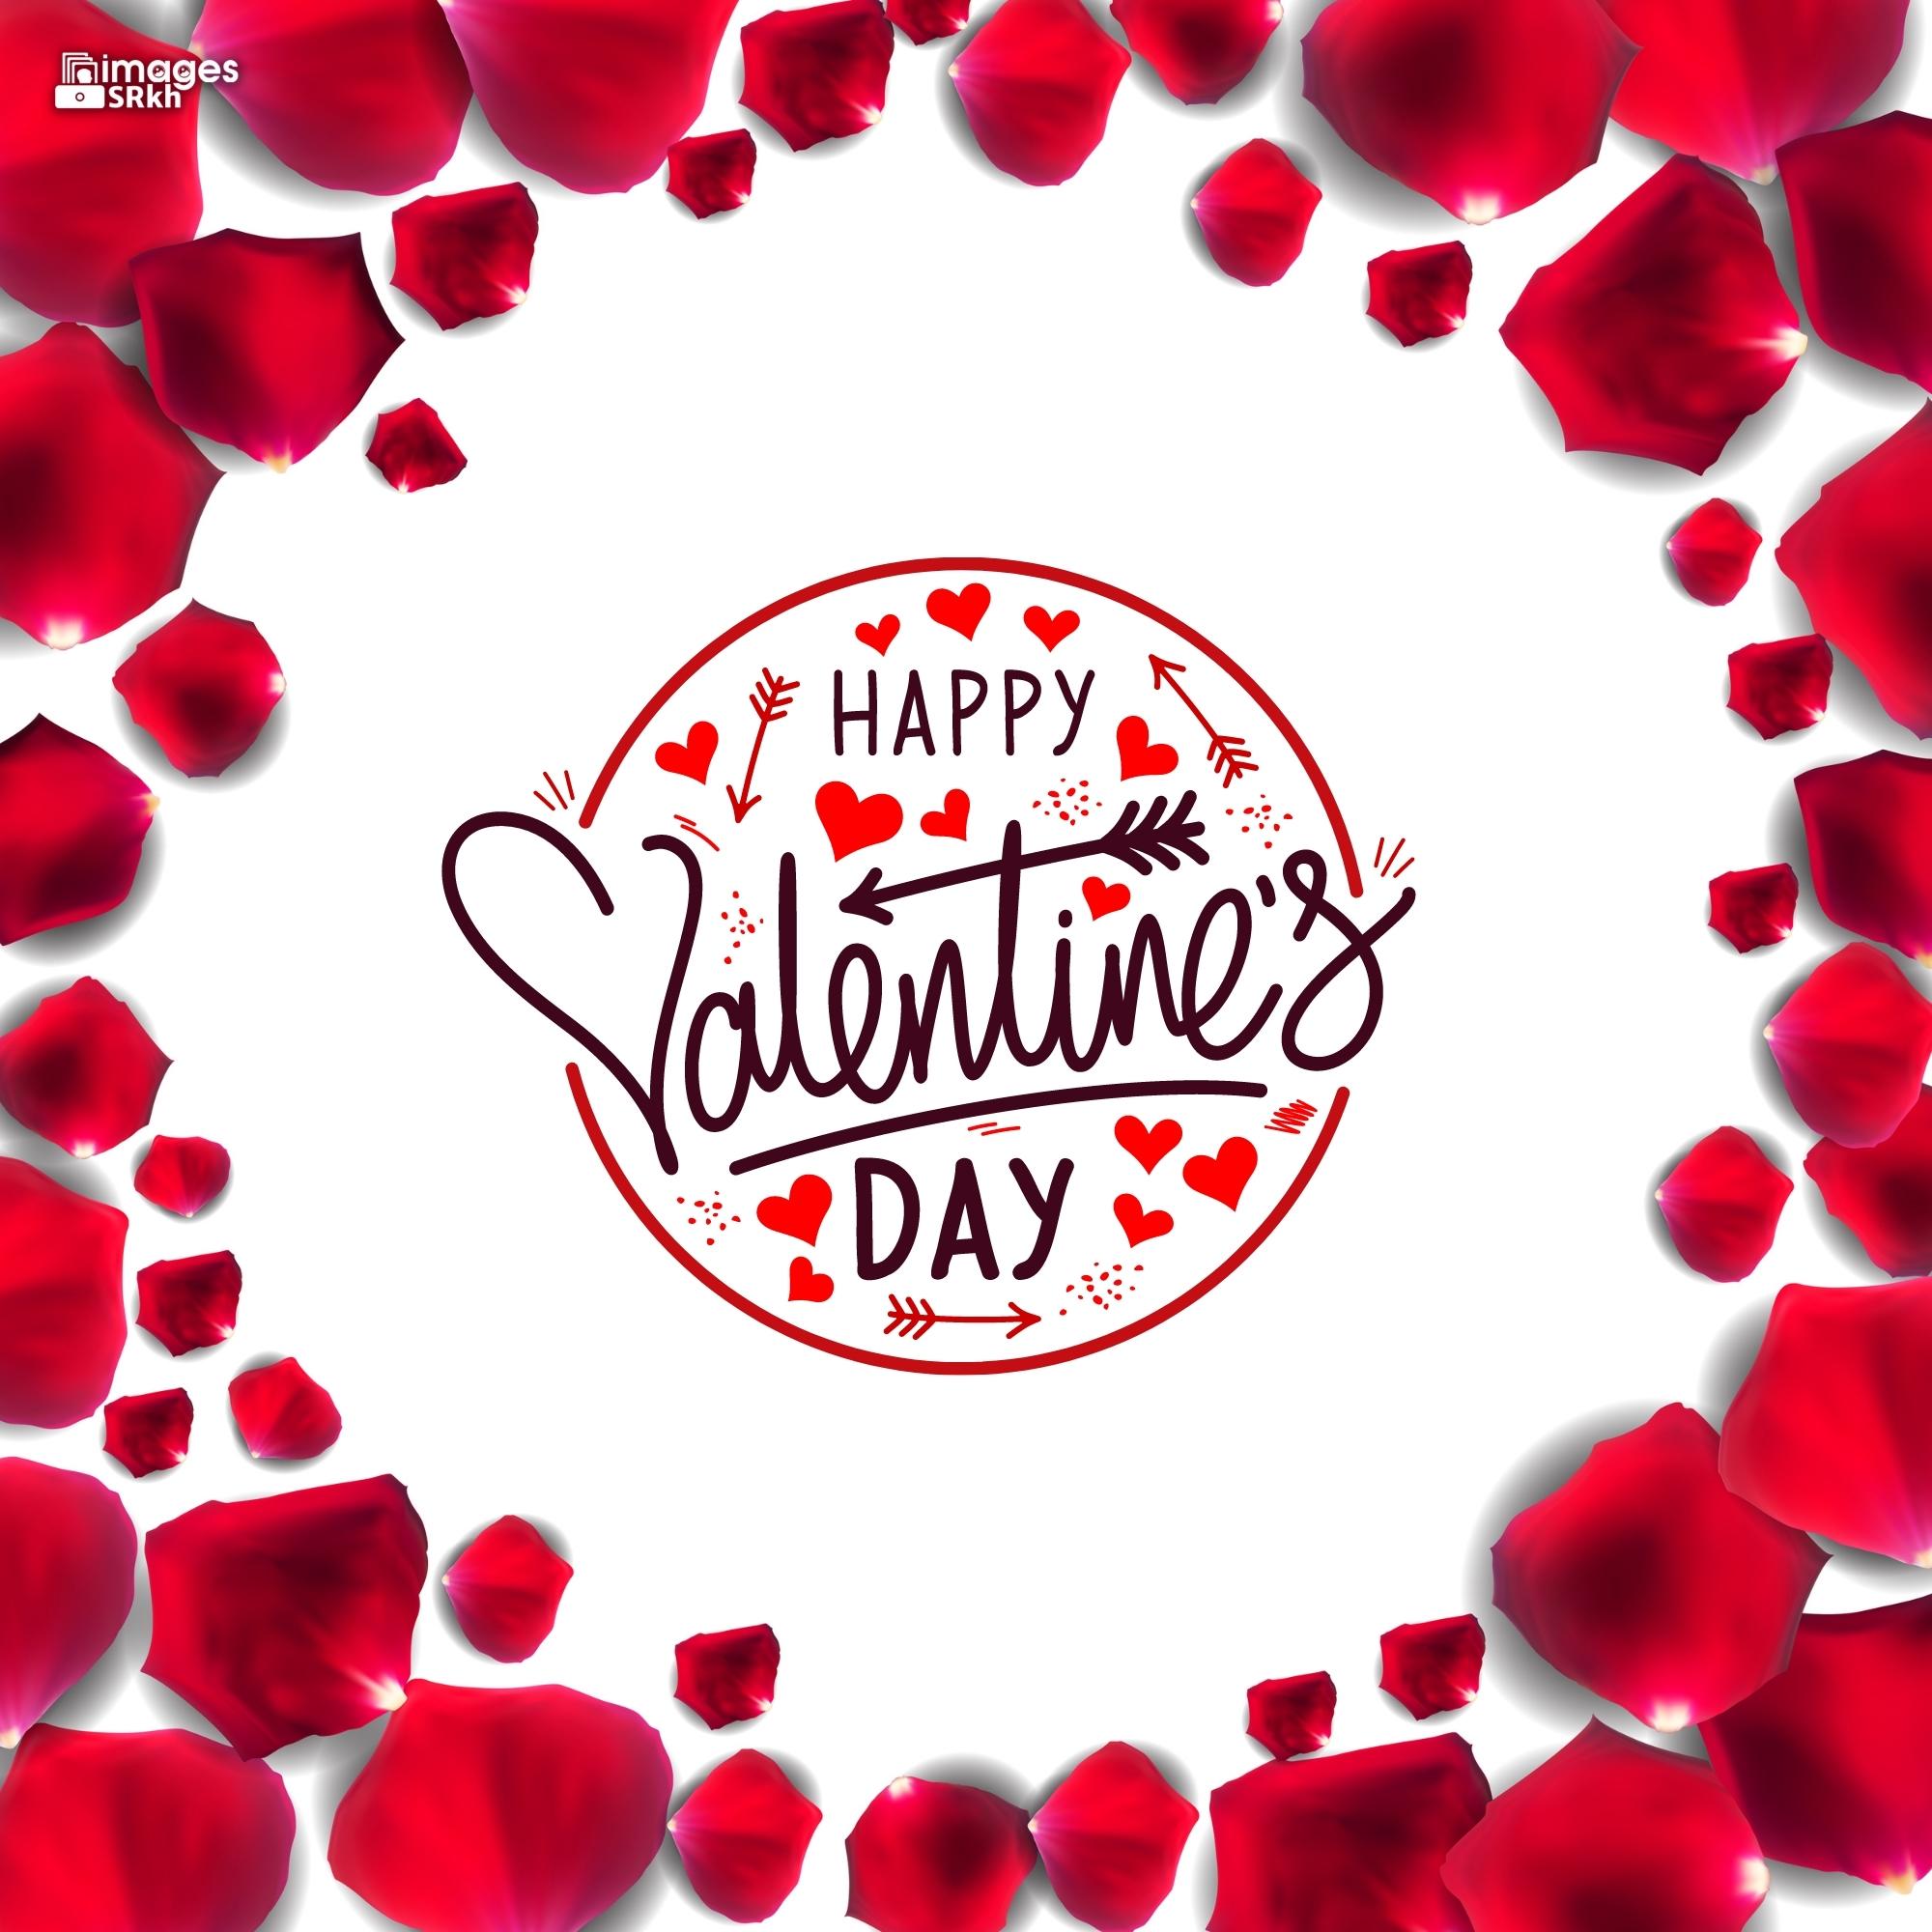 Happy Valentines Day | 462 | PREMIUM IMAGES | Wishes for Love